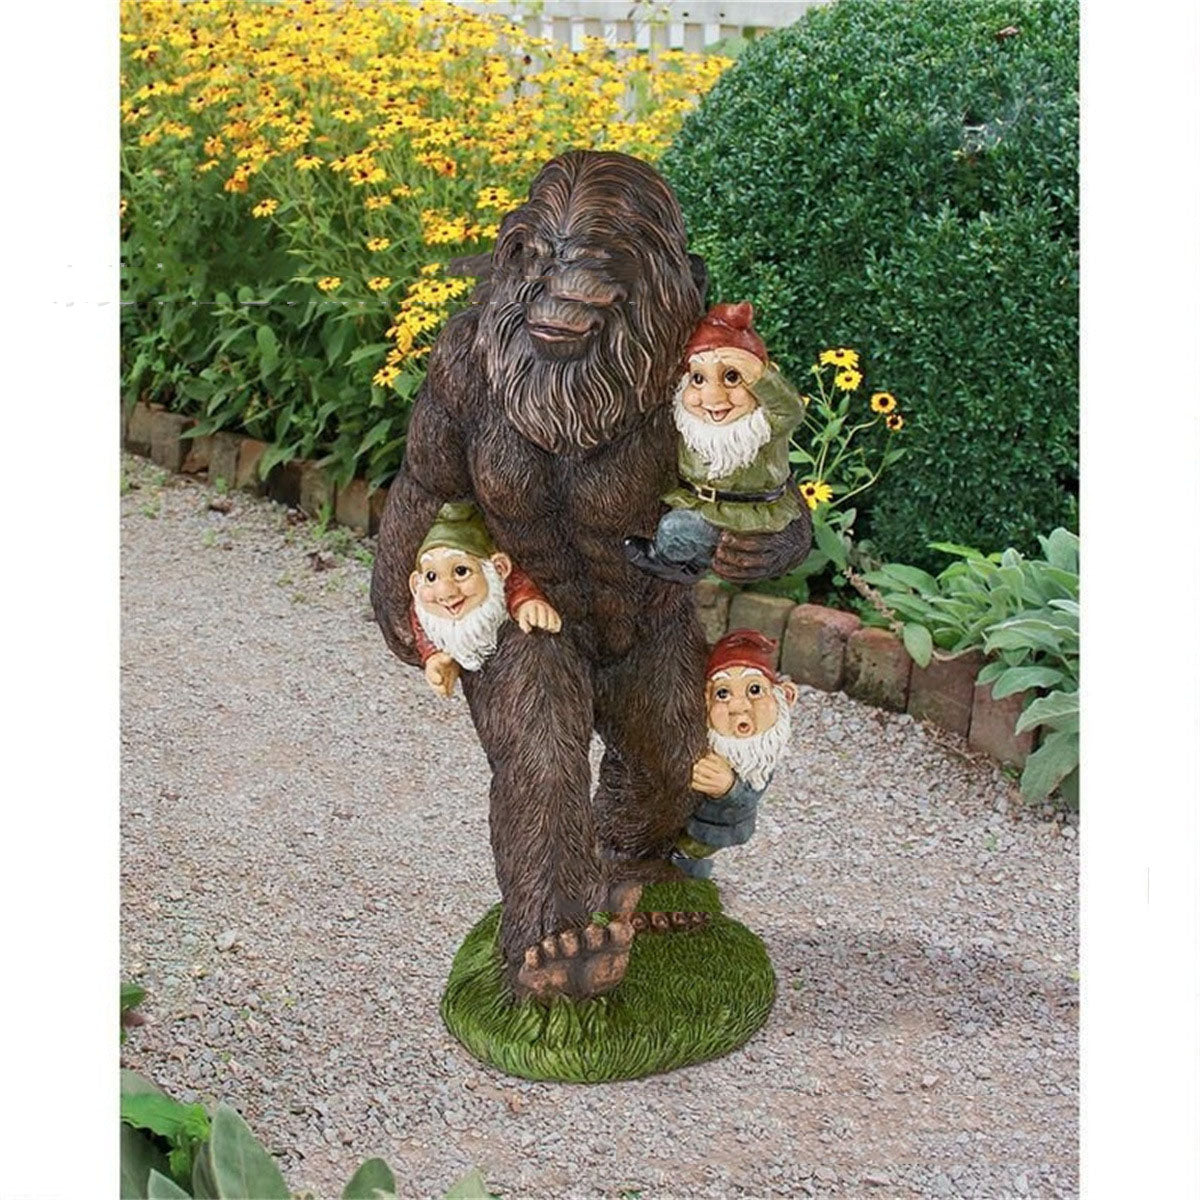 Garden gnomes, Lawn gnomes, Outdoor gnomes, Yard gnomes, Ceramic gnomes, Concrete gnomes, Resin gnomes, Funny gnomes, Classic gnomes, Cute gnomes, Gnome statues, Decorative gnomes, Fantasy gnomes, Hand-painted gnomes, Whimsical gnomes, Gnome figurines, Novelty gnomes, Gnome with wheelbarrow, Gnome with mushroom, Gnome with lantern,, Gorilla Resin Crafts Garden Home Decoration Statue Ornaments, 